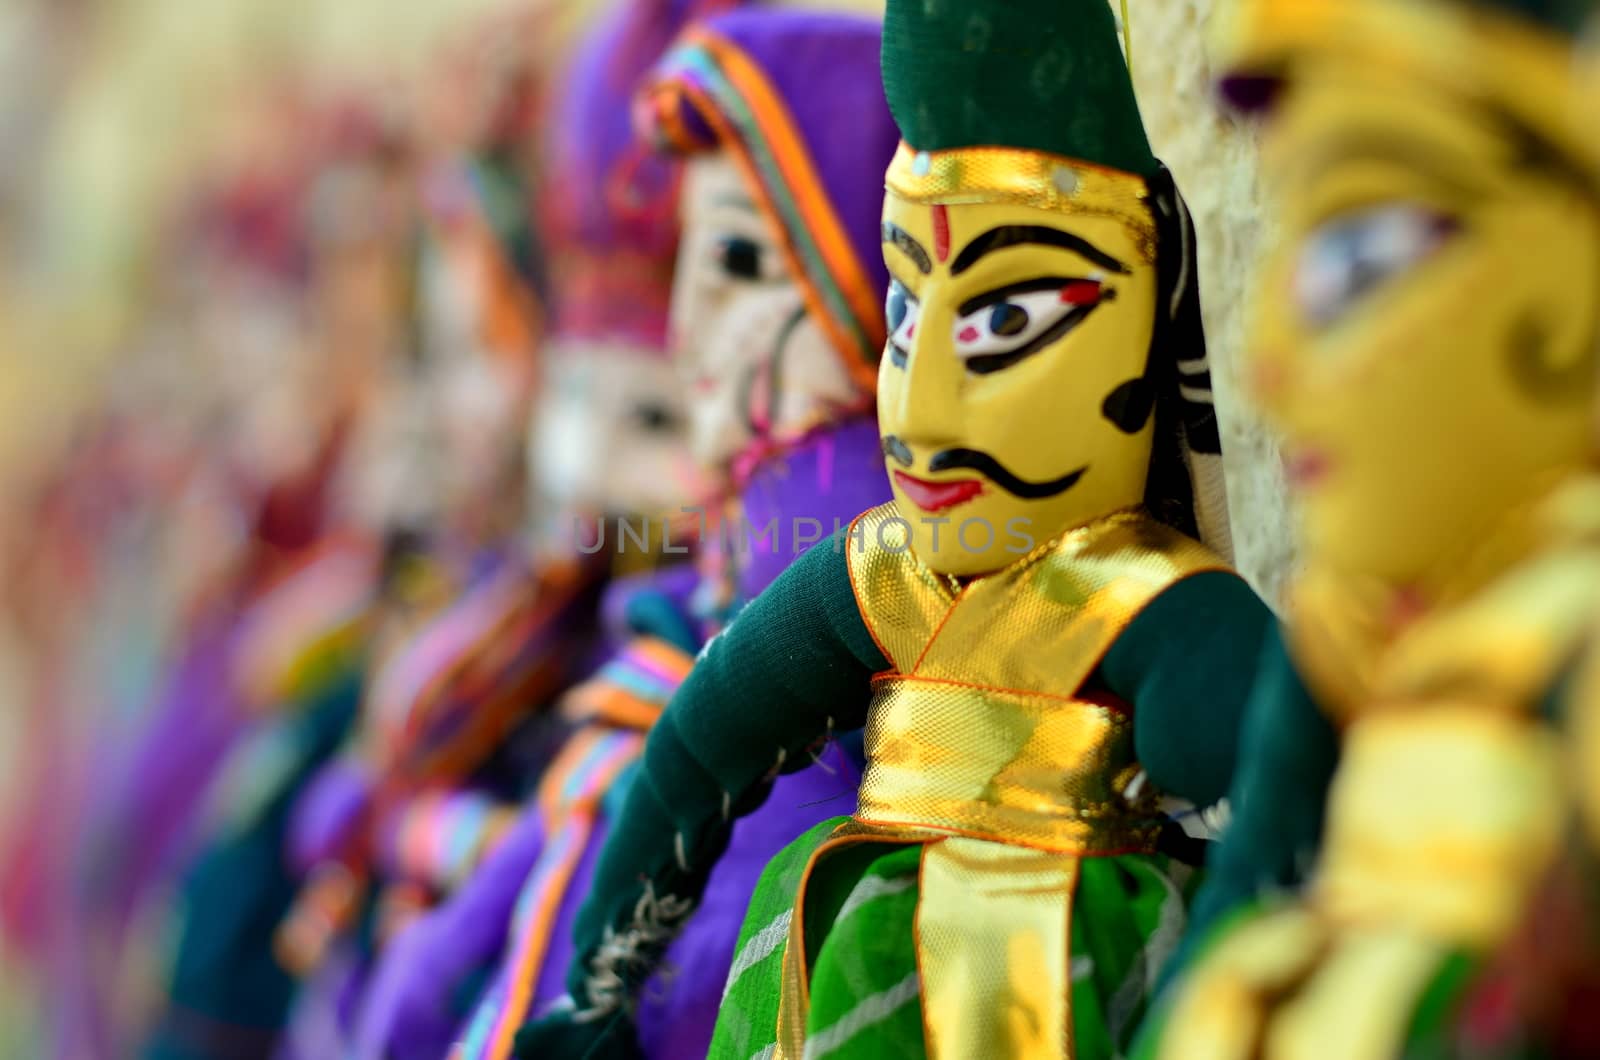 Rajasthani puppets (Kathputli) on display at shop in Mehrangarh Fort in Jodhpur. Kathputli is a string puppet theatre, native to Rajasthan, India, and is the most popular form of Indian puppetry.